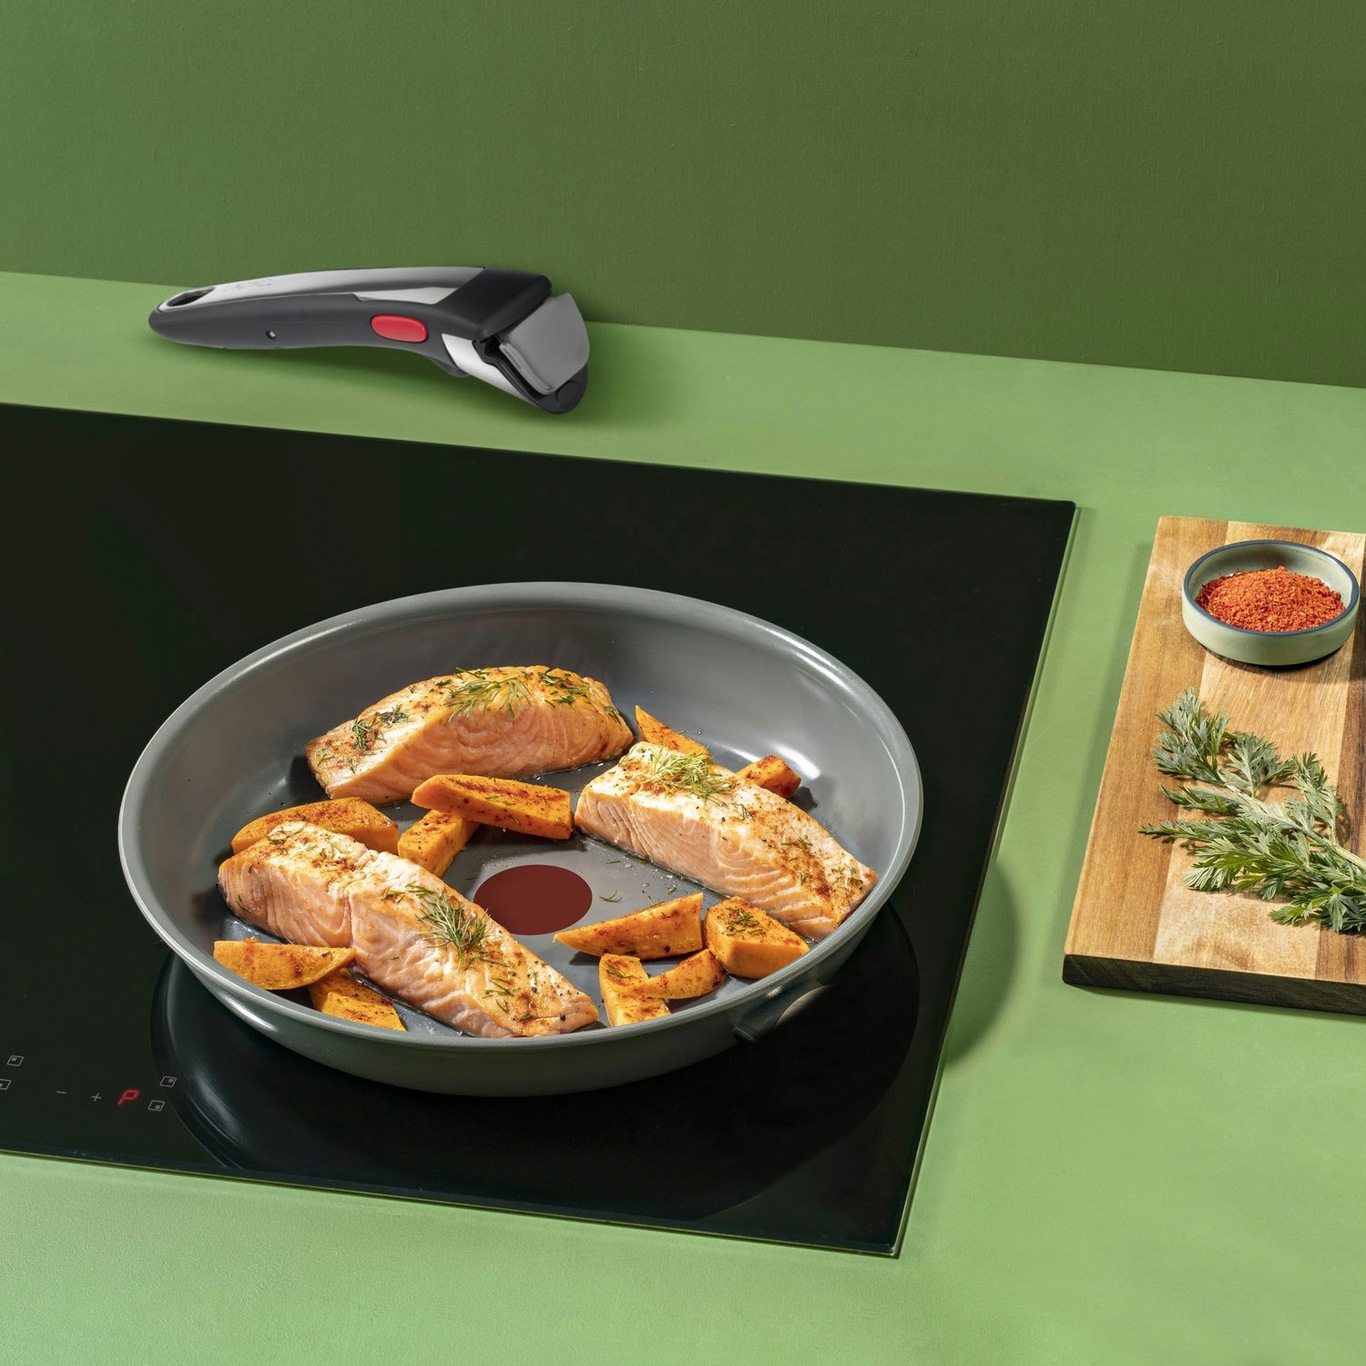 Tefal Ingenio Easy-On Cookware Set with Non-Stick Surface and Heat